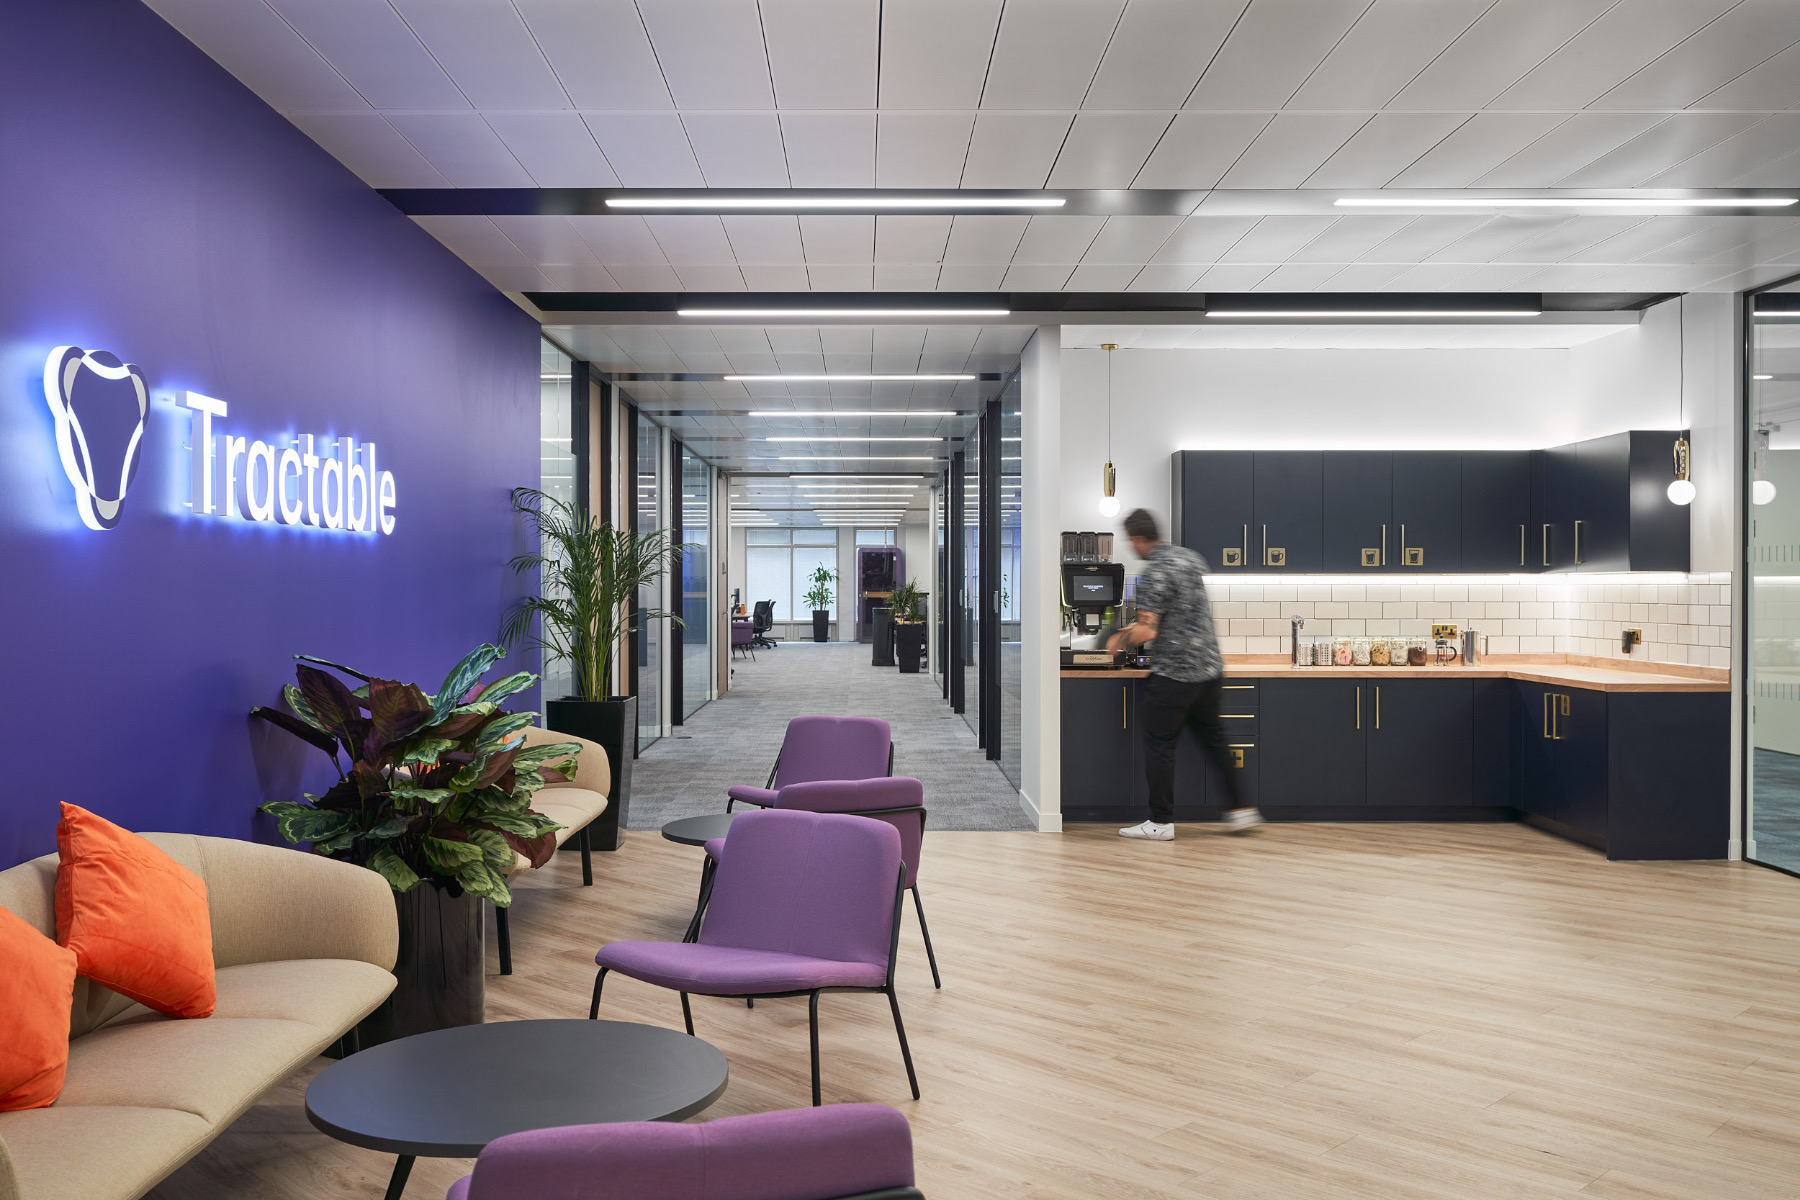 A Look Inside Tractable’s New London Office